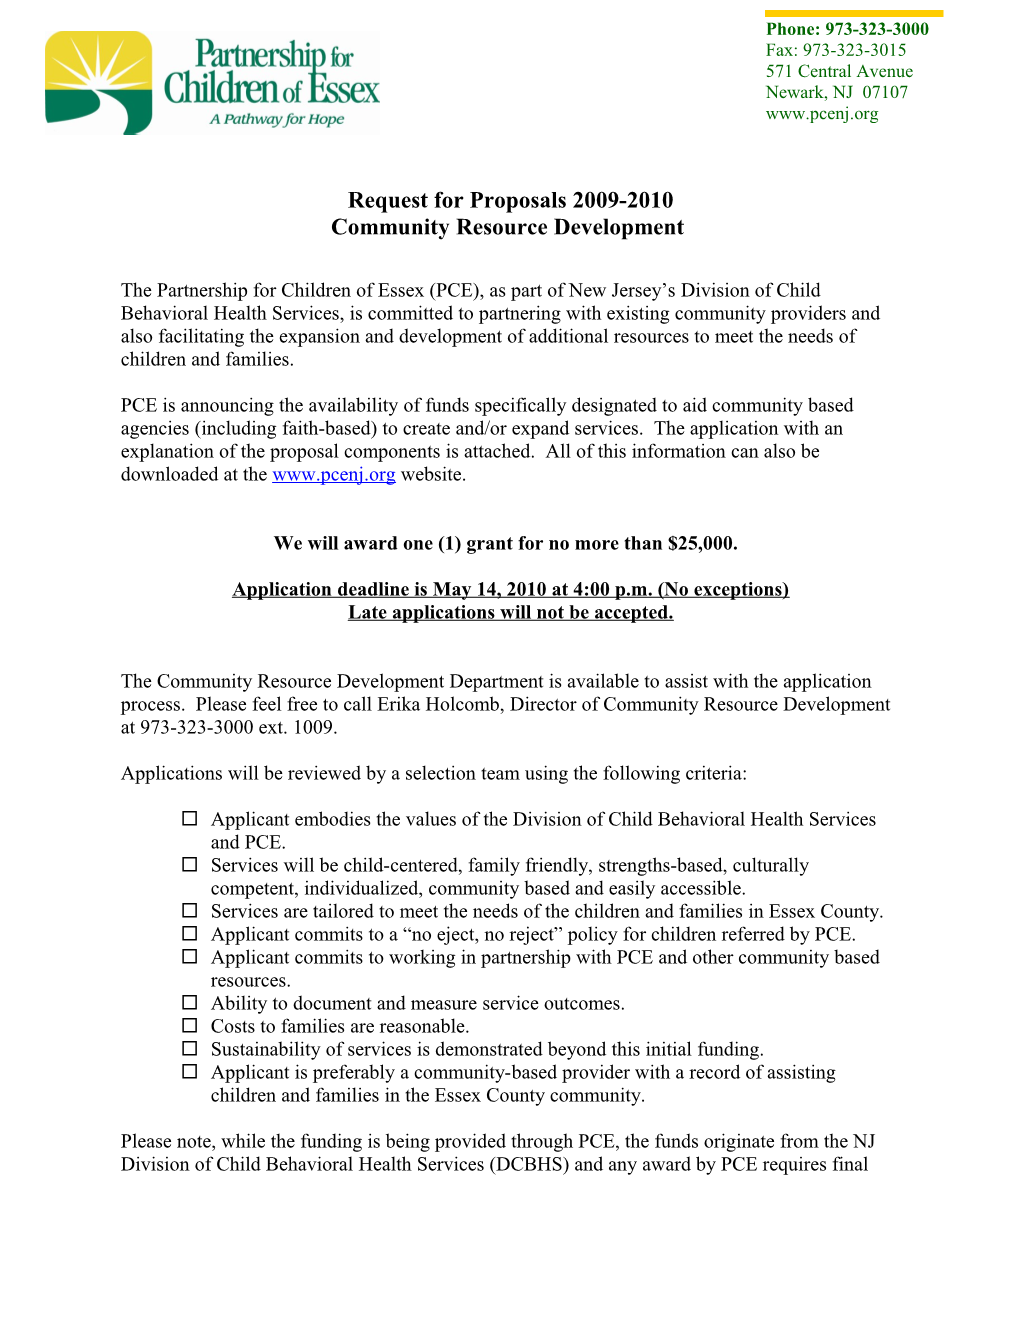 Request for Proposals 2009-2010